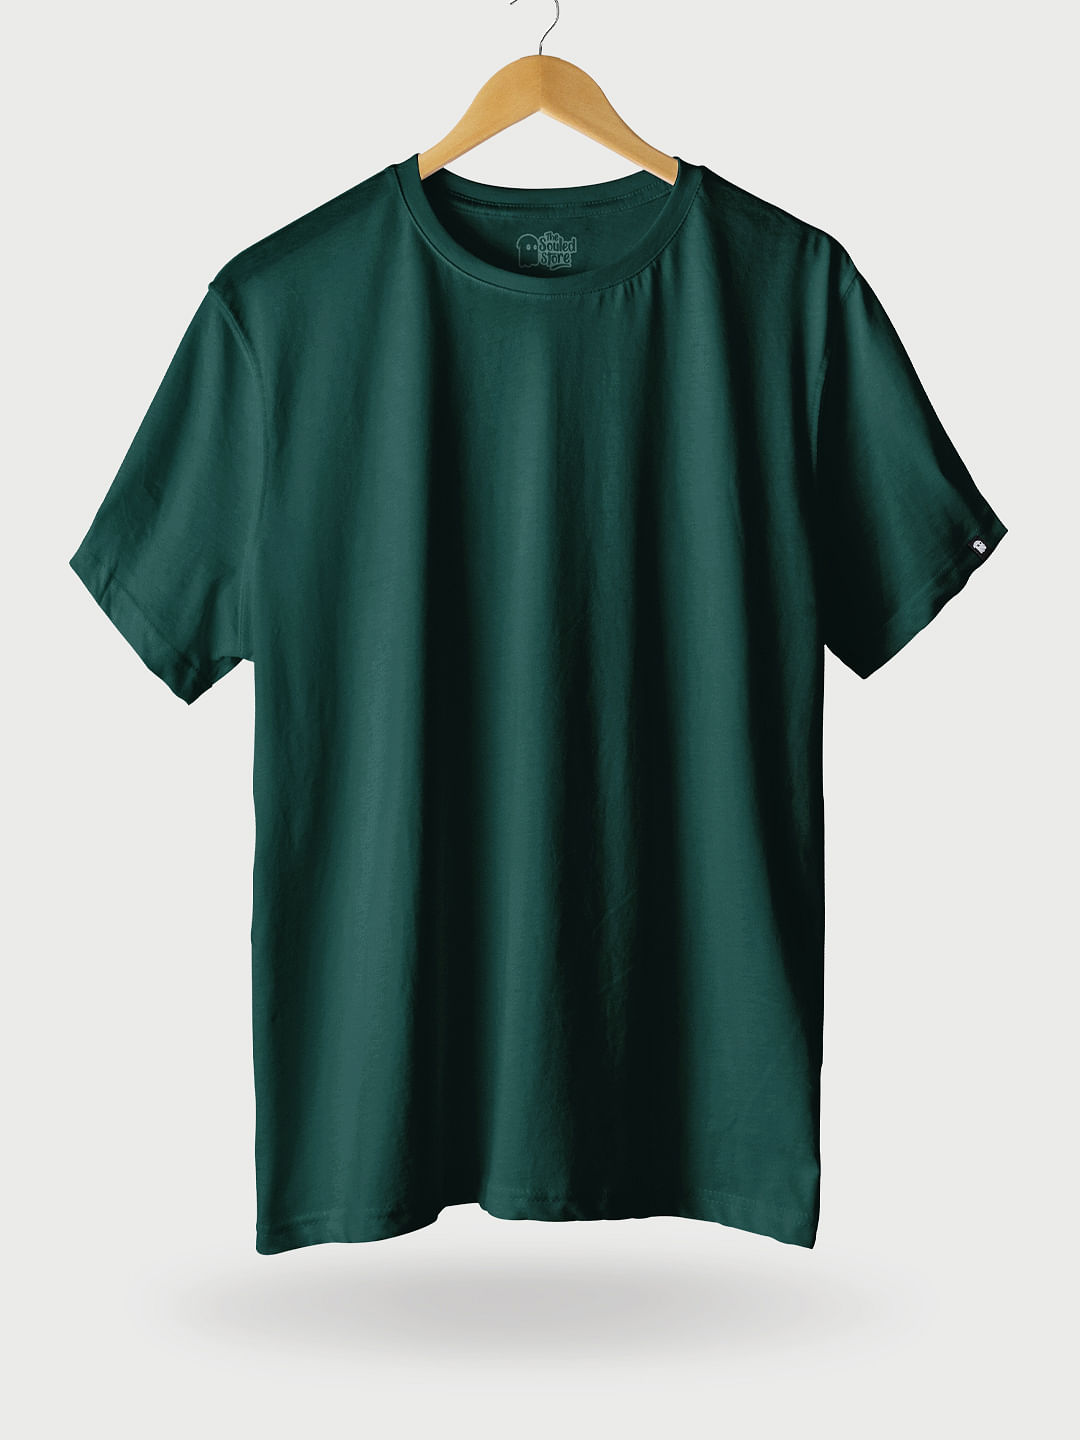 Buy Solids: Bottle Green Half Sleeve T-Shirts online at The Souled Store.